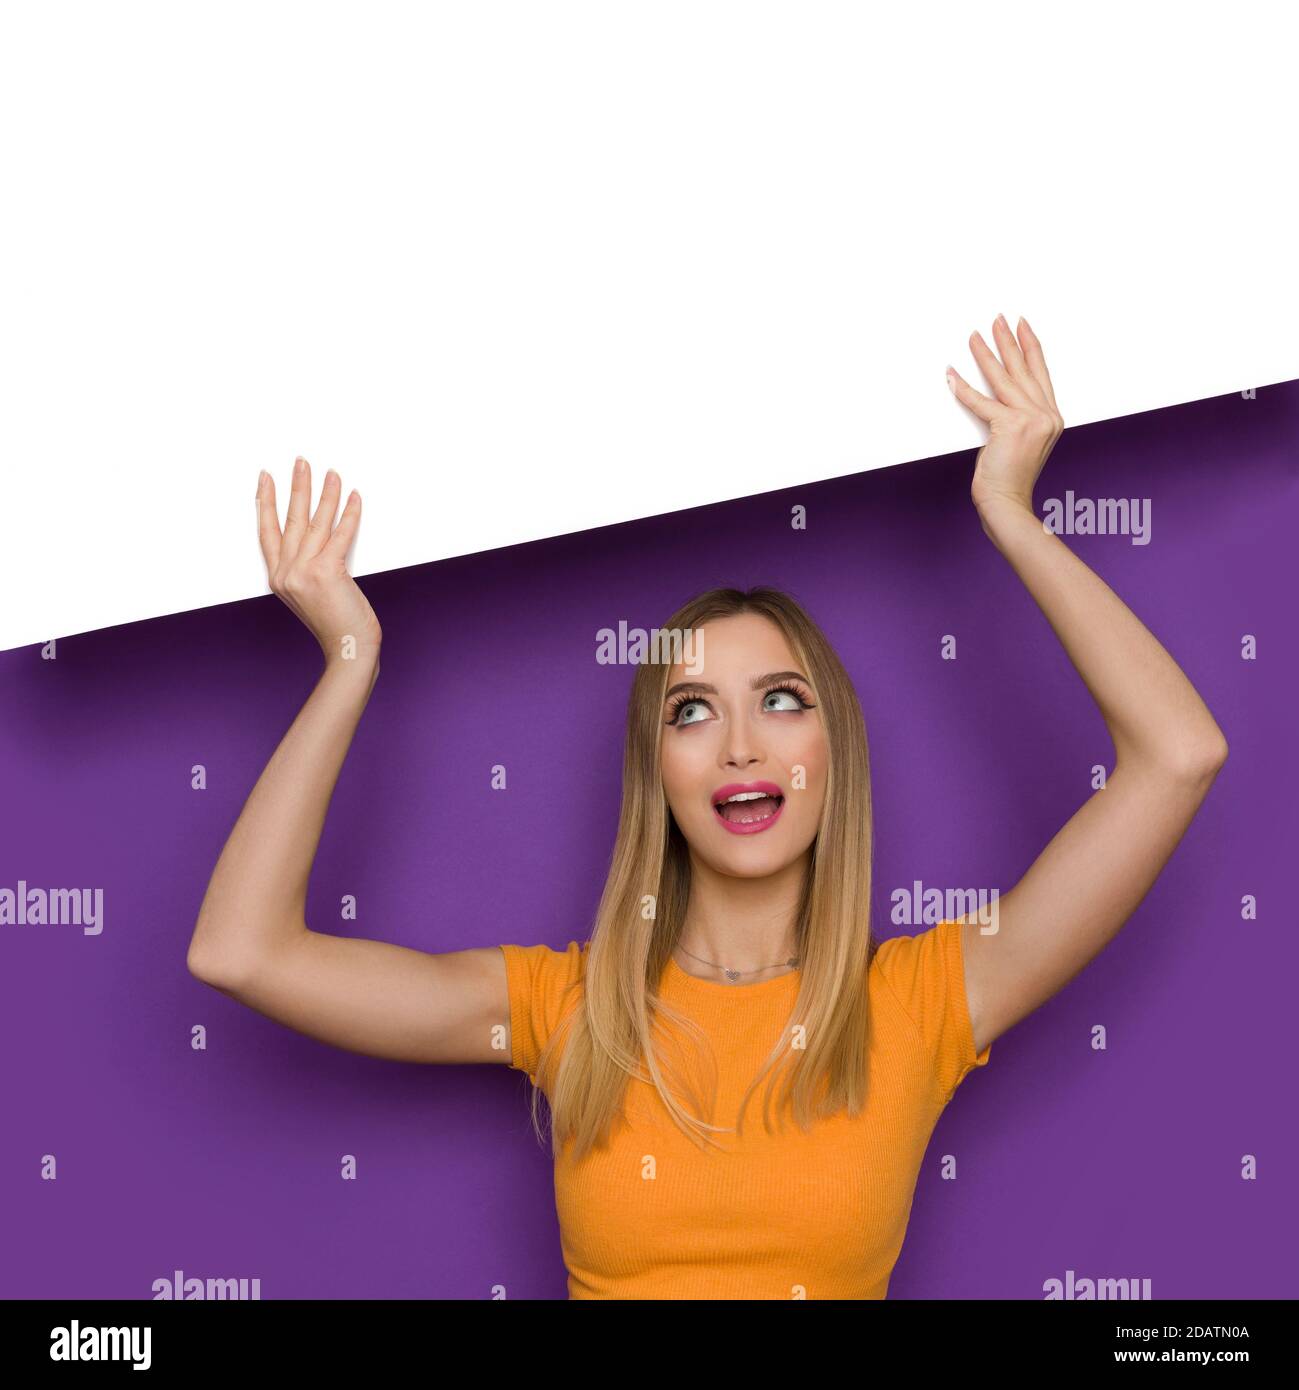 Beautiful young woman in orange top is holding white banner over head, looking up and talking. Front view. Waist up studio shot on purple background. Stock Photo